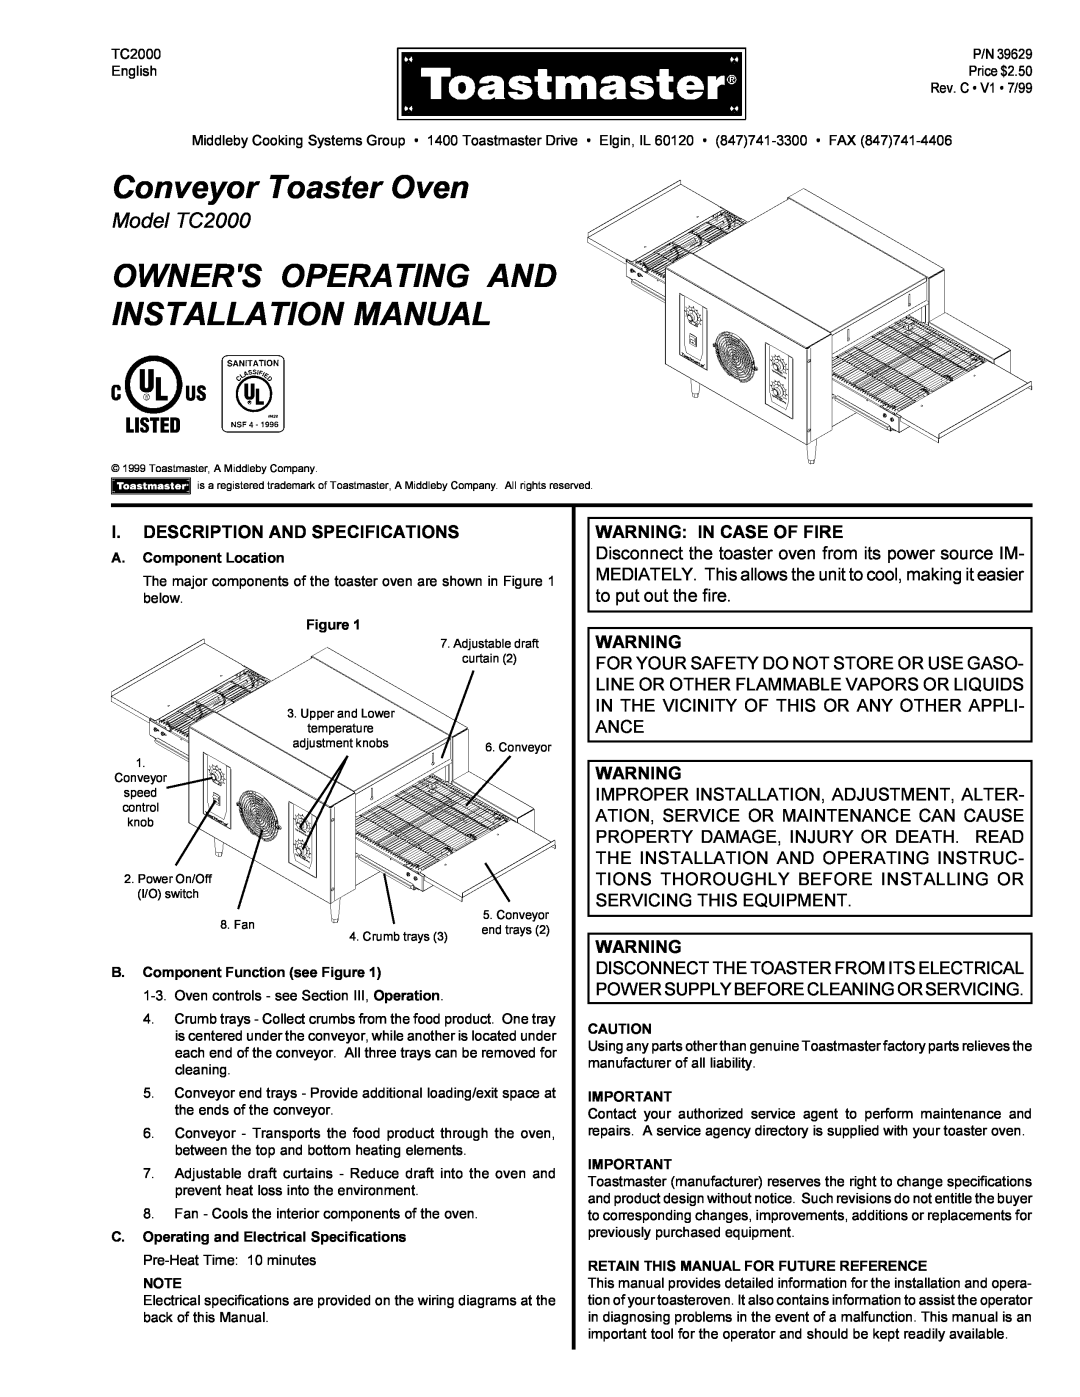 Toastmaster installation manual Retain This Manual For Future Reference, Conveyor Oven, Model TC2000 